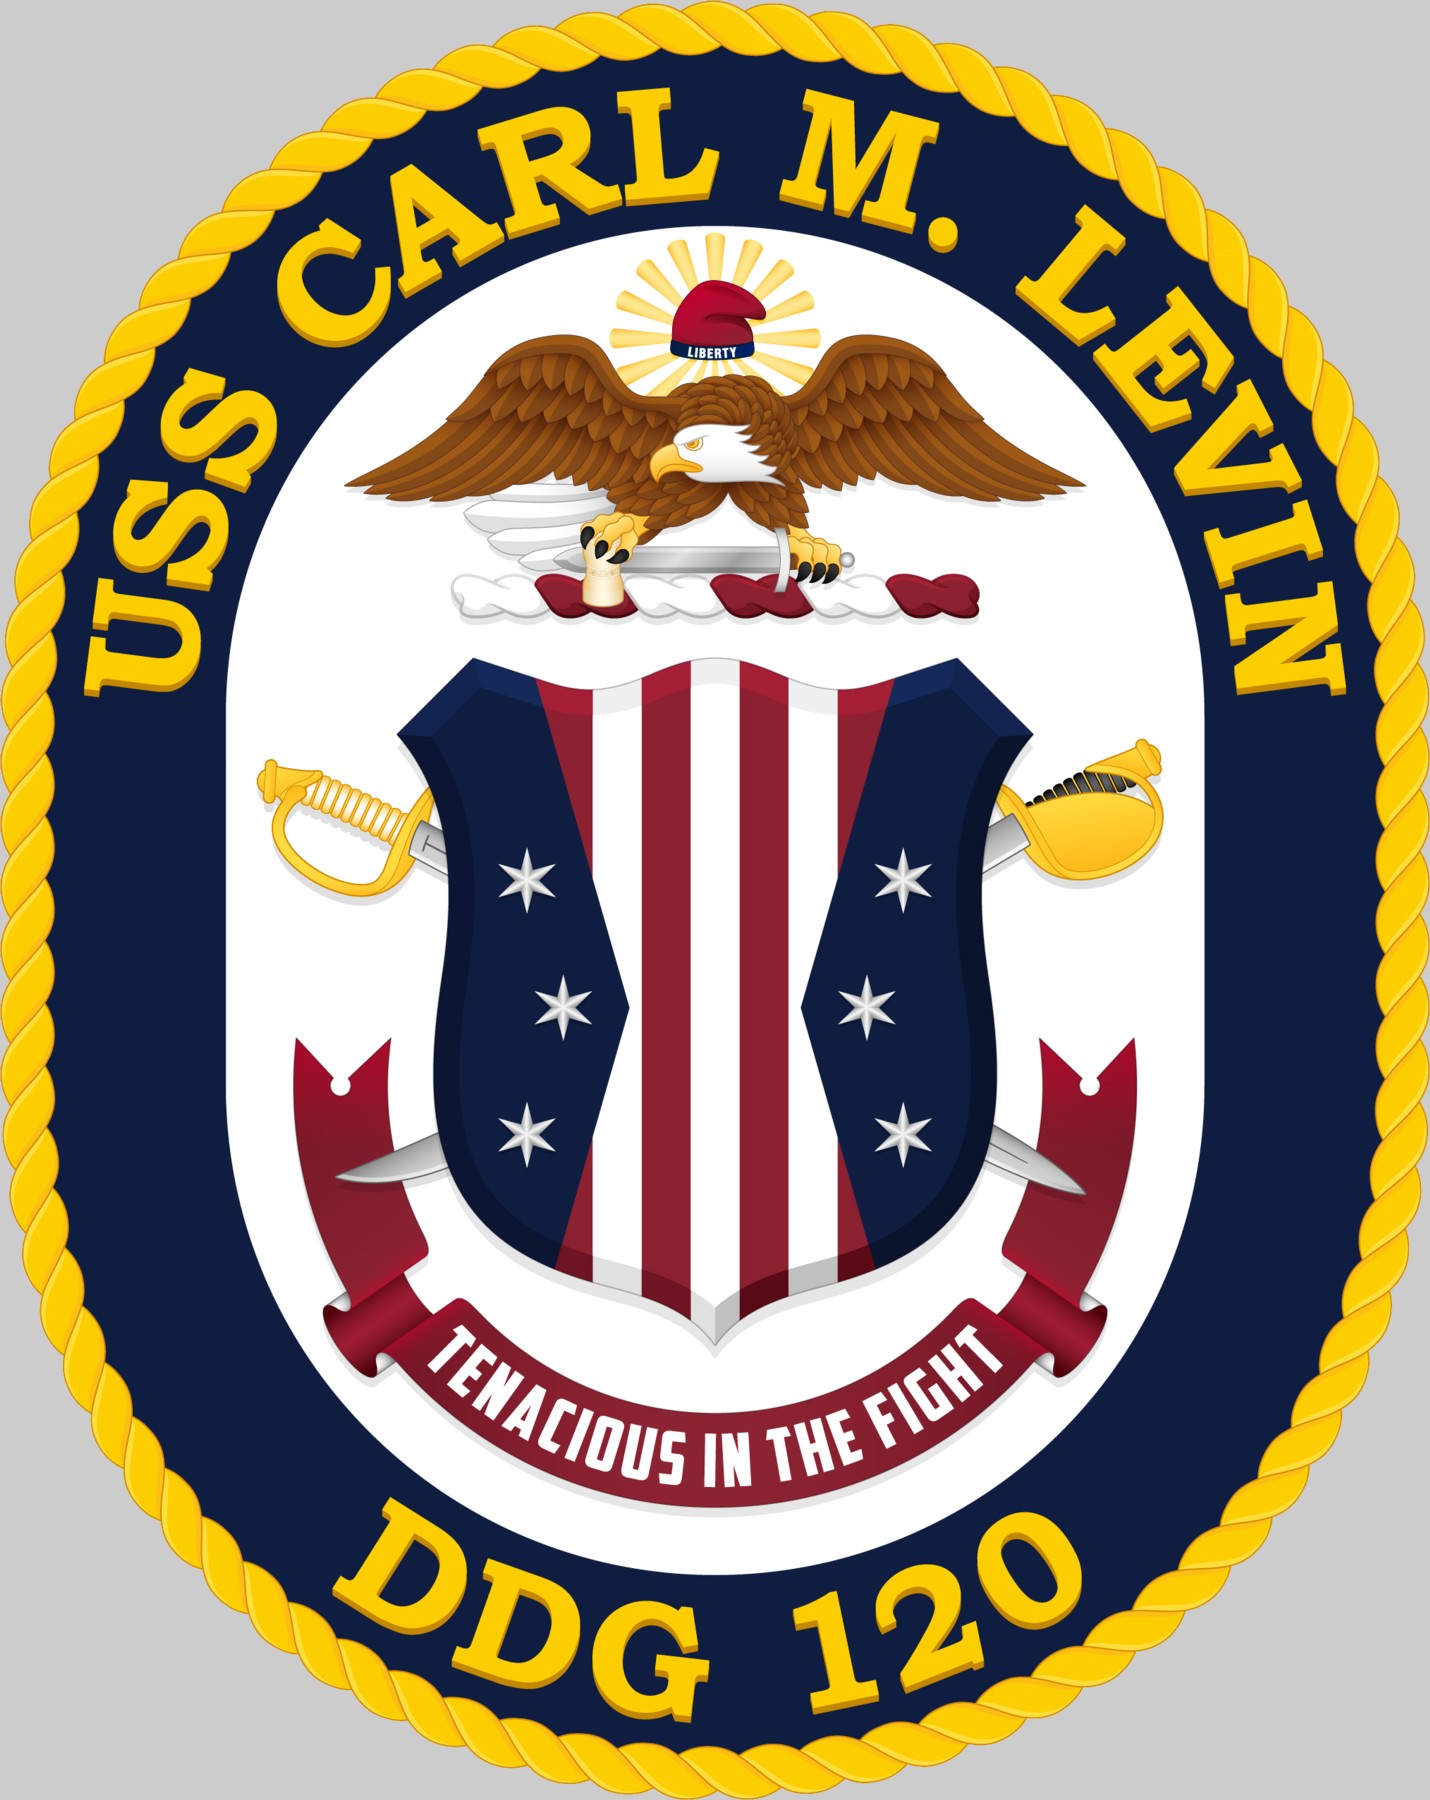 ddg-120 uss carl m. levin insignia crest patch badge arleigh burke class guided missile destroyer us navy 02c